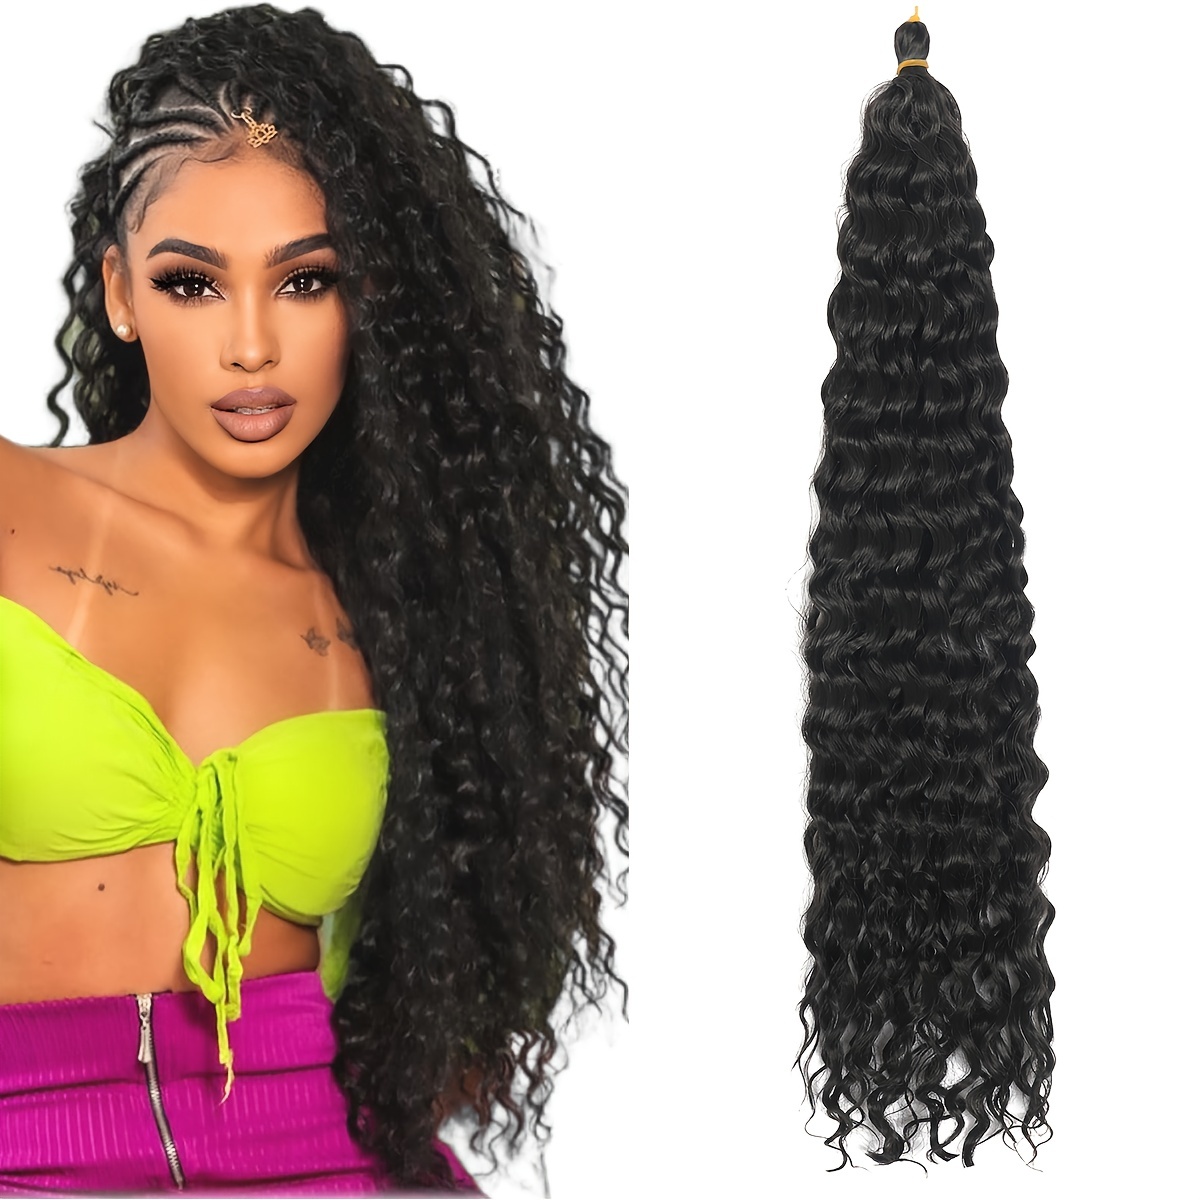 

Black Crochet Hair Pre Looped 20 Inch Curly Braiding Ocean Wave Crochet Hair 1pack Ocean Wave Crochet Braids Synthetic Hair Extensions For Women